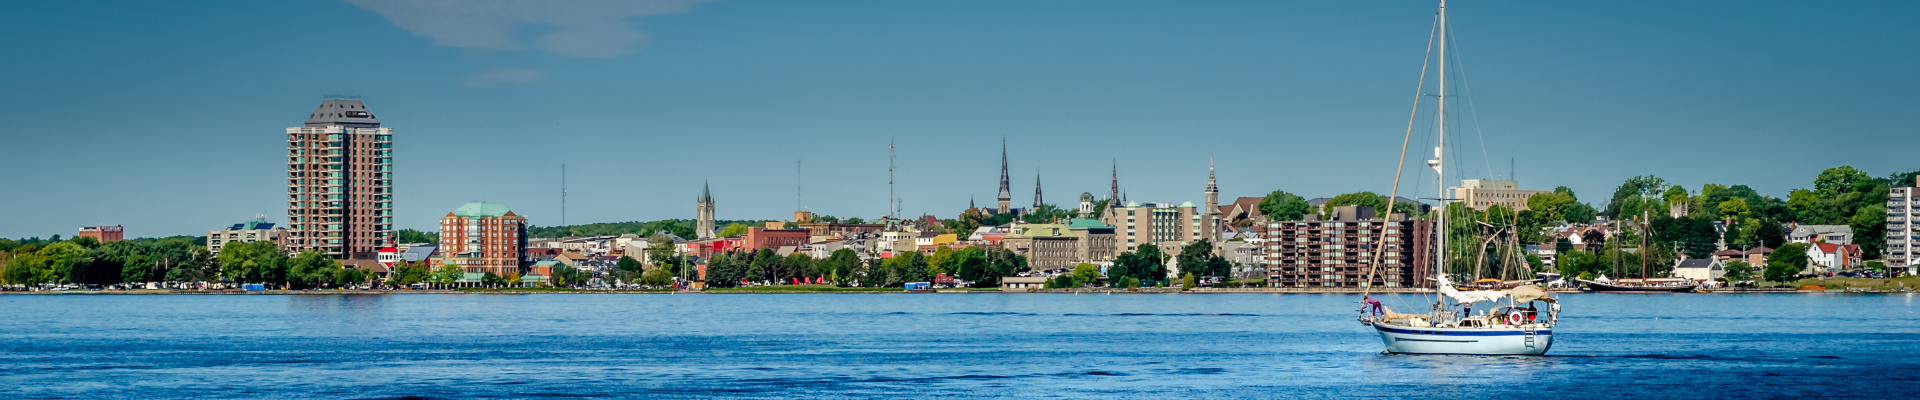 Brockville skyline as seen from the river, with a sailboat moored in the river in the foreground